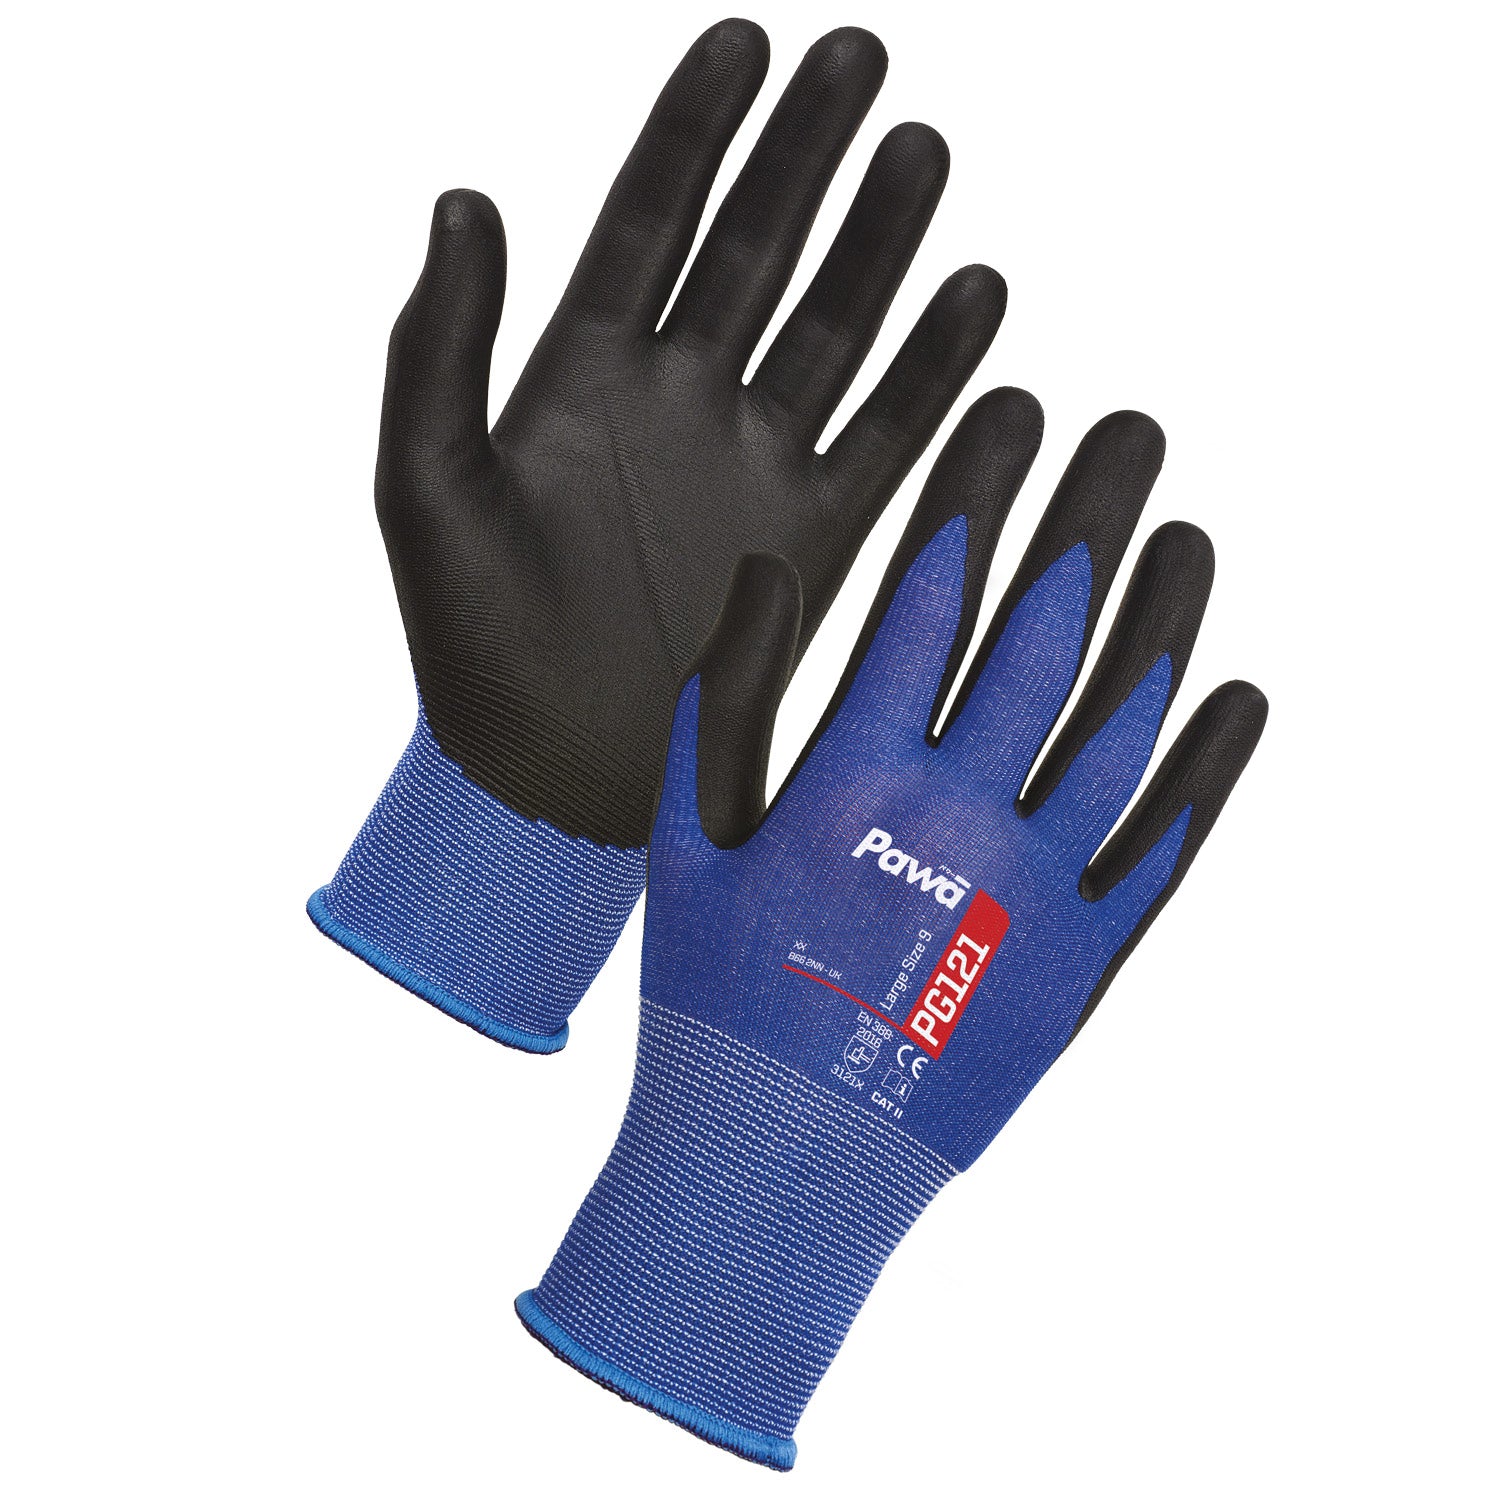 Supertouch Pawa PG121 Gloves